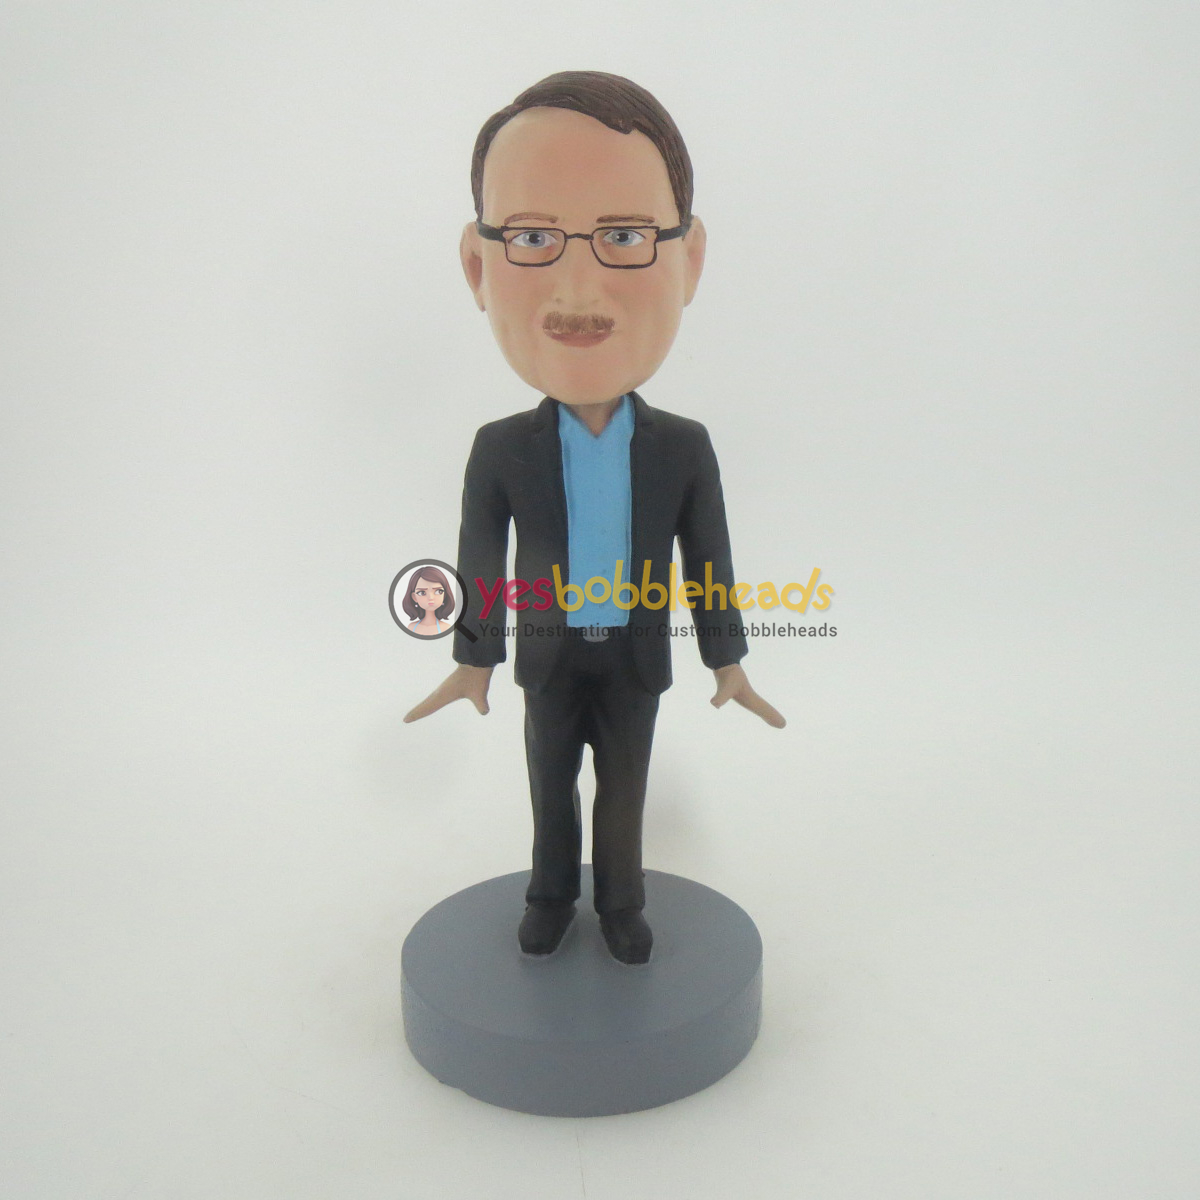 Picture of Custom Bobblehead Doll: Man In Formal Black Suit